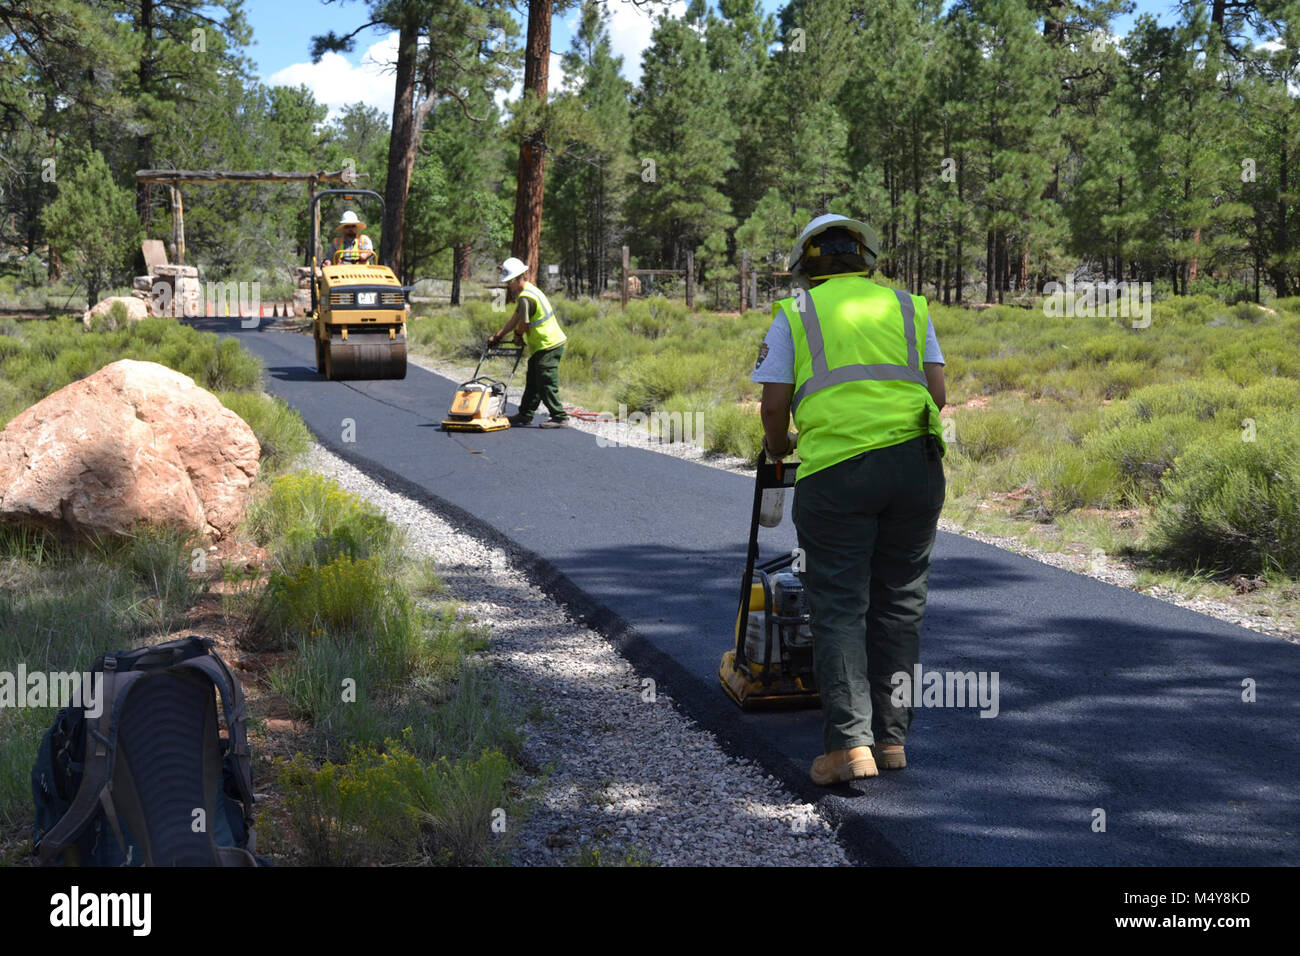 Workers smooth asphalt with paving machines.  Between August 10 to September 10, 2016 the Greenway Trail between the IMAX Theater parking area in Tusayan and Center Road in Grand Canyon National Park will be closed while Grand Canyon's trail crew installs asphalt. The portion of the trail north of Center Road will not be affected.  While the trail closure is in effect, cyclists and hikers may ride the Tusayan shuttle (Purple Route) which is equipped with bicycle carrier racks. The shuttle connects Tusayan with the South Rim Visitor Center, a 20 minute ride each way.  The intent of this project Stock Photo